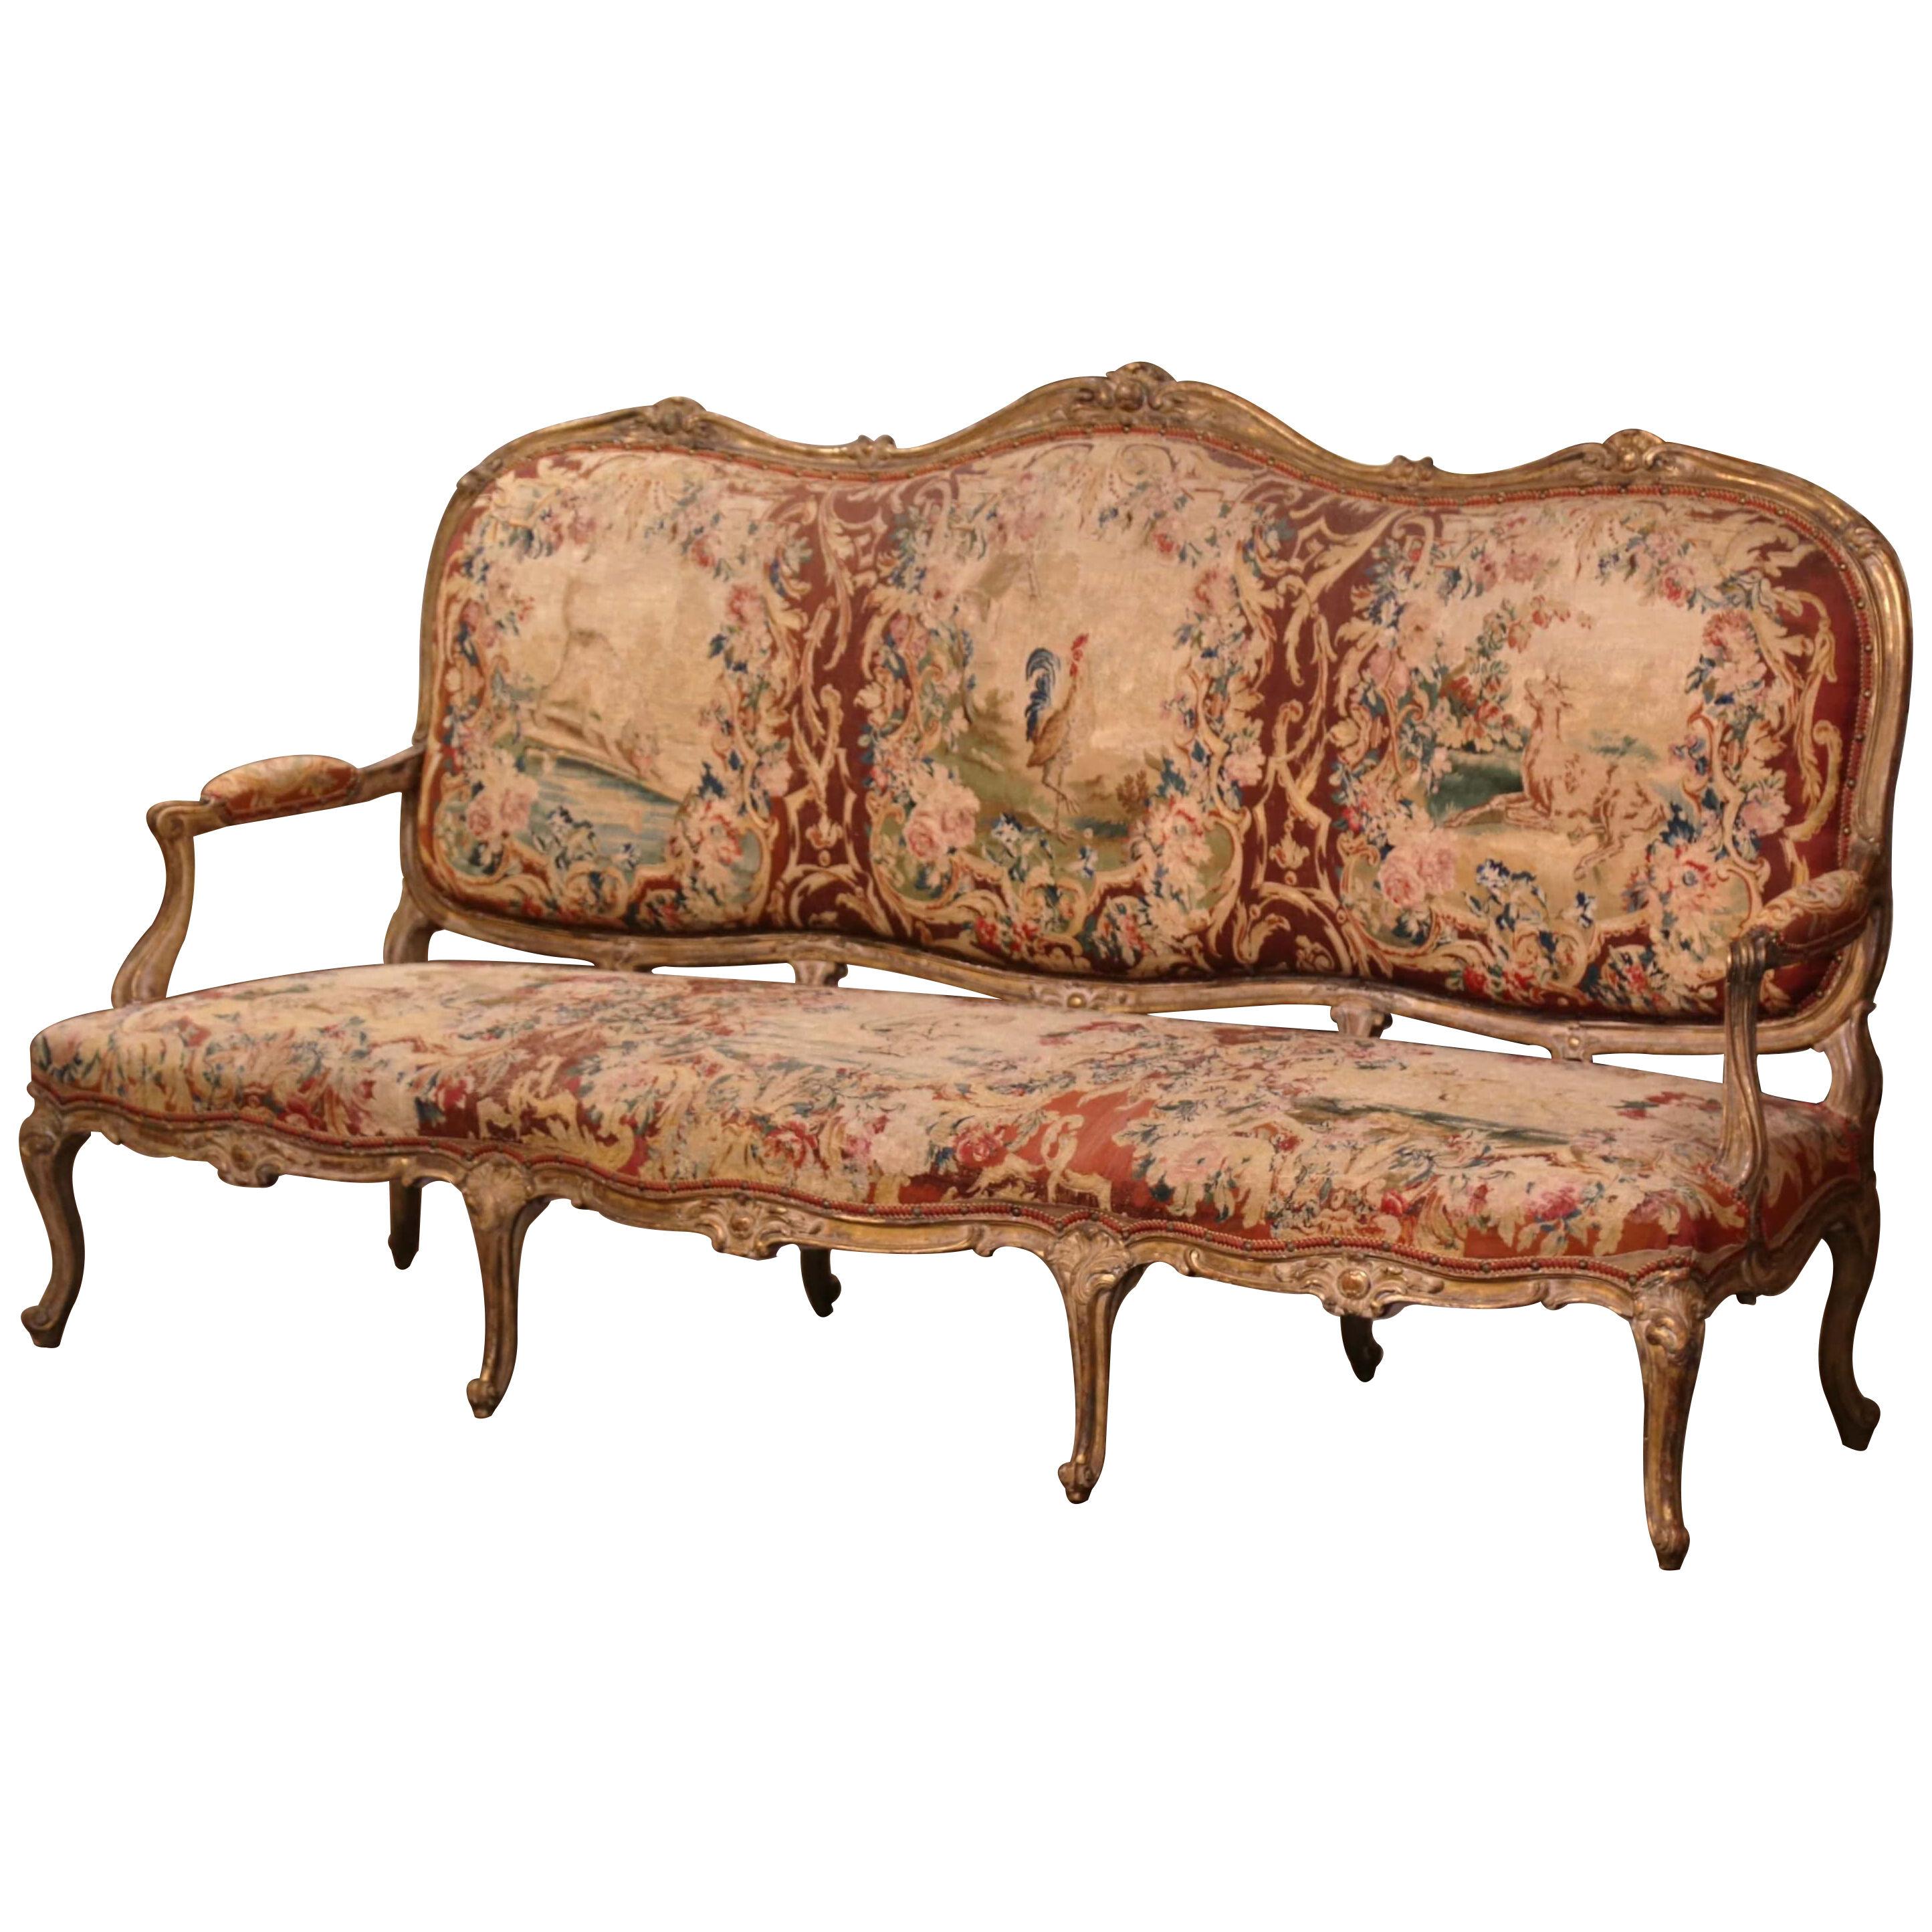 18th Century French Louis XV Carved Giltwood Canapé with Aubusson Tapestry